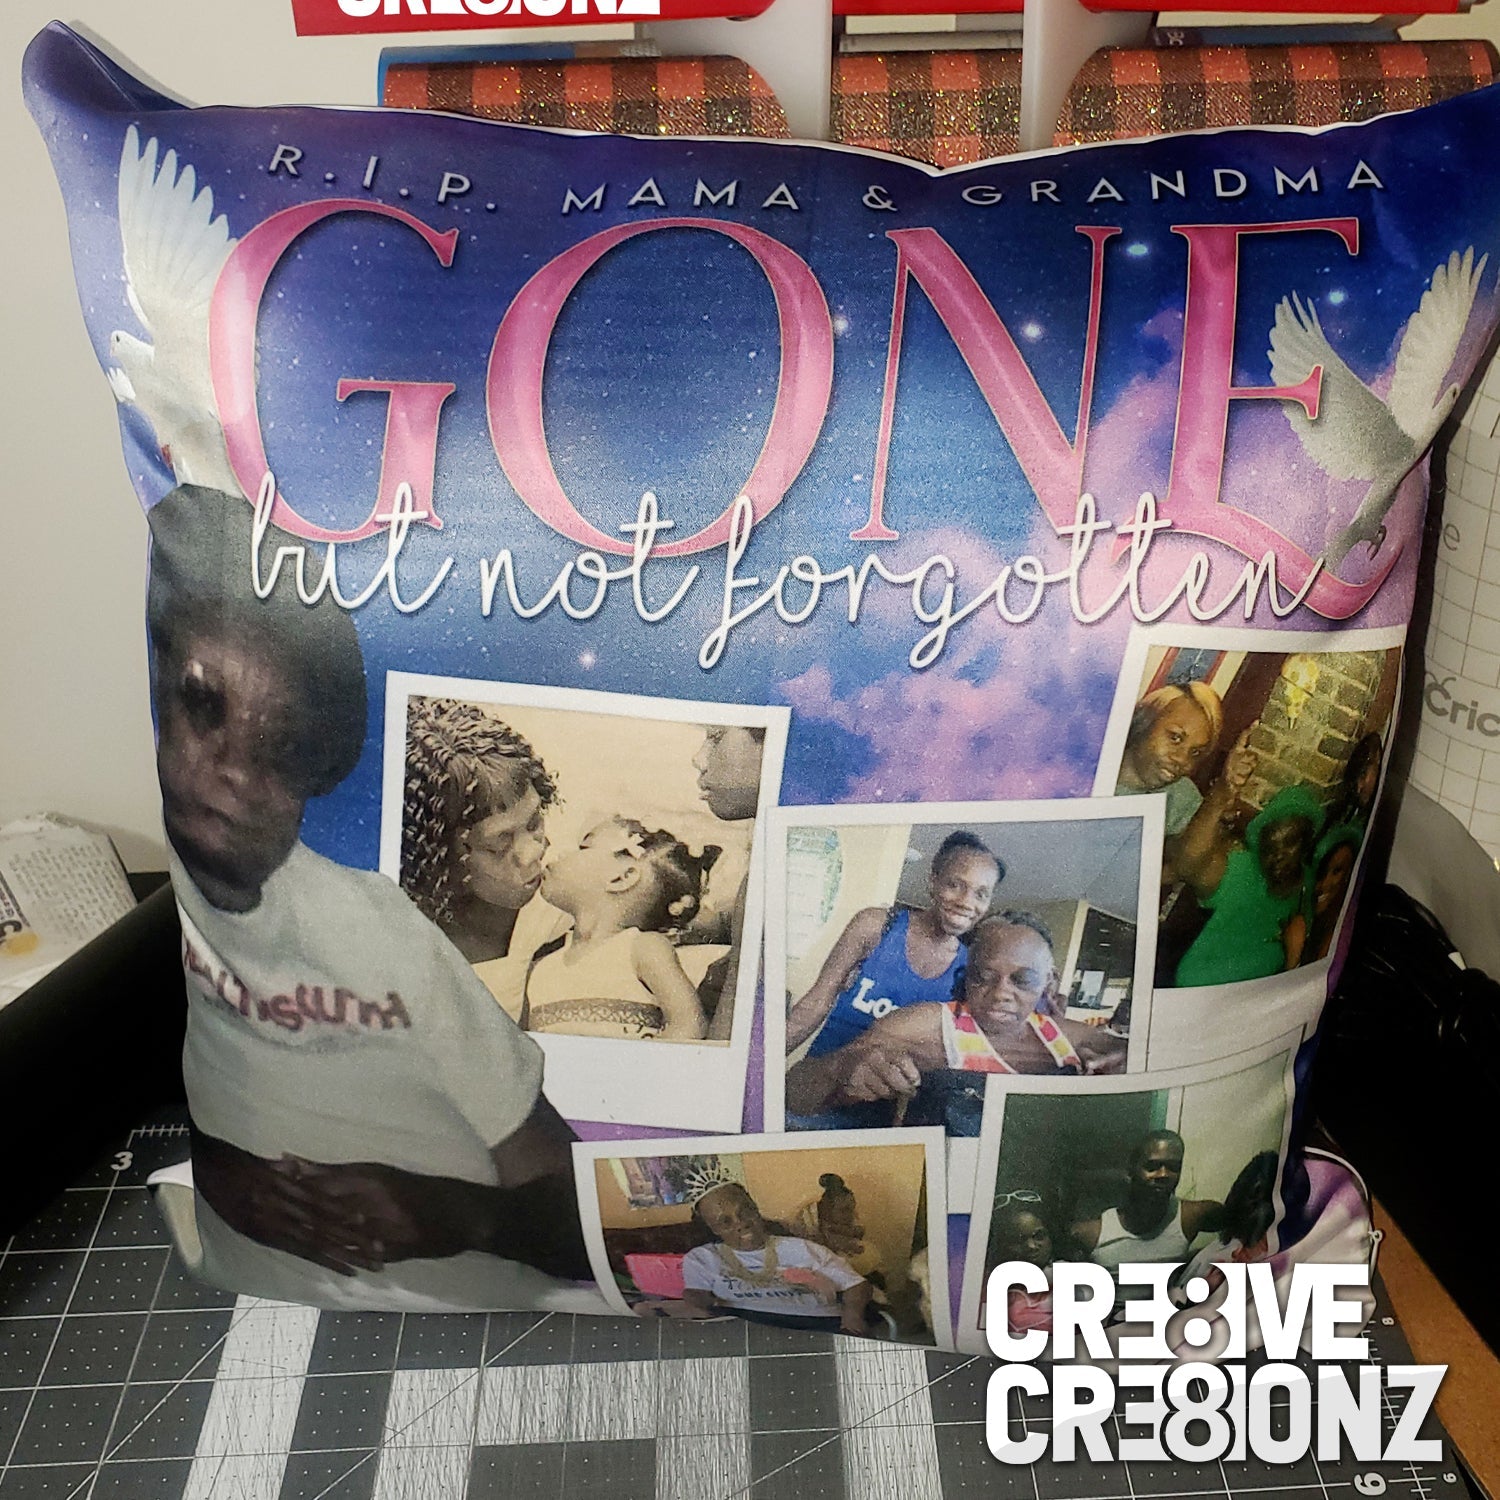 Custom Pillow - Cre8ive Cre8ionz